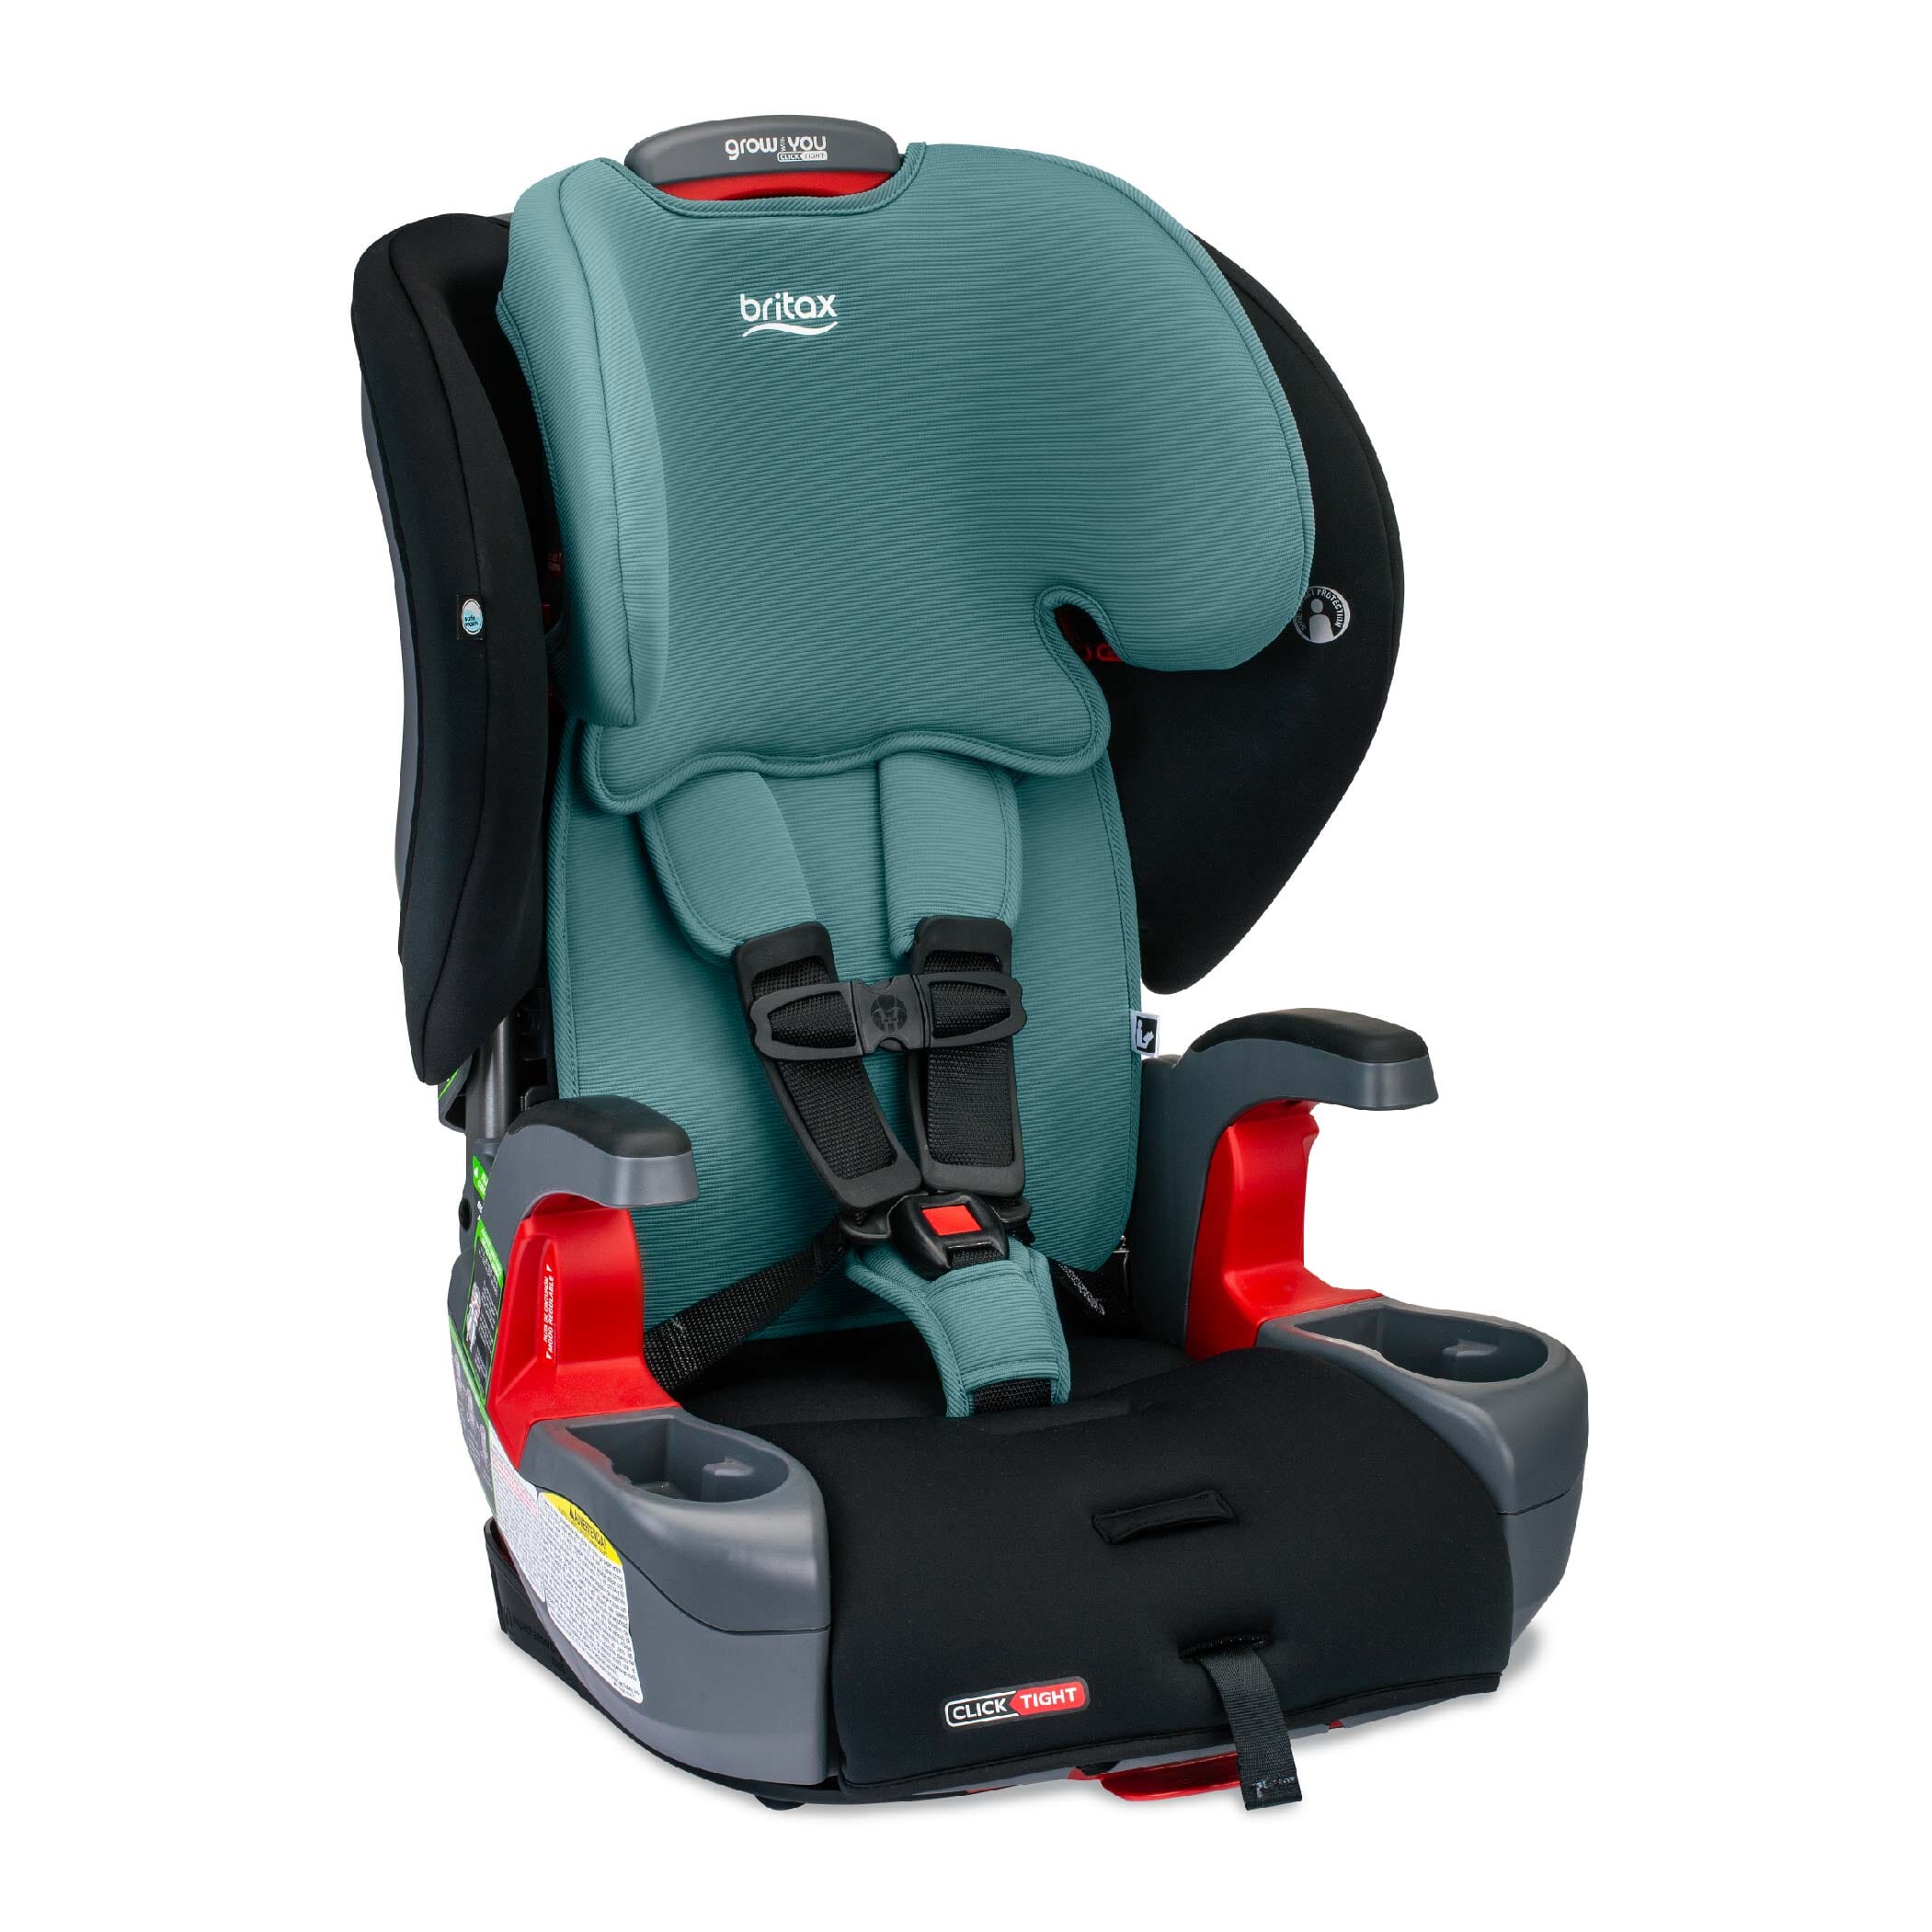 Britax Grow With You ClickTight Harness-2-Booster Car Seat Child Seat